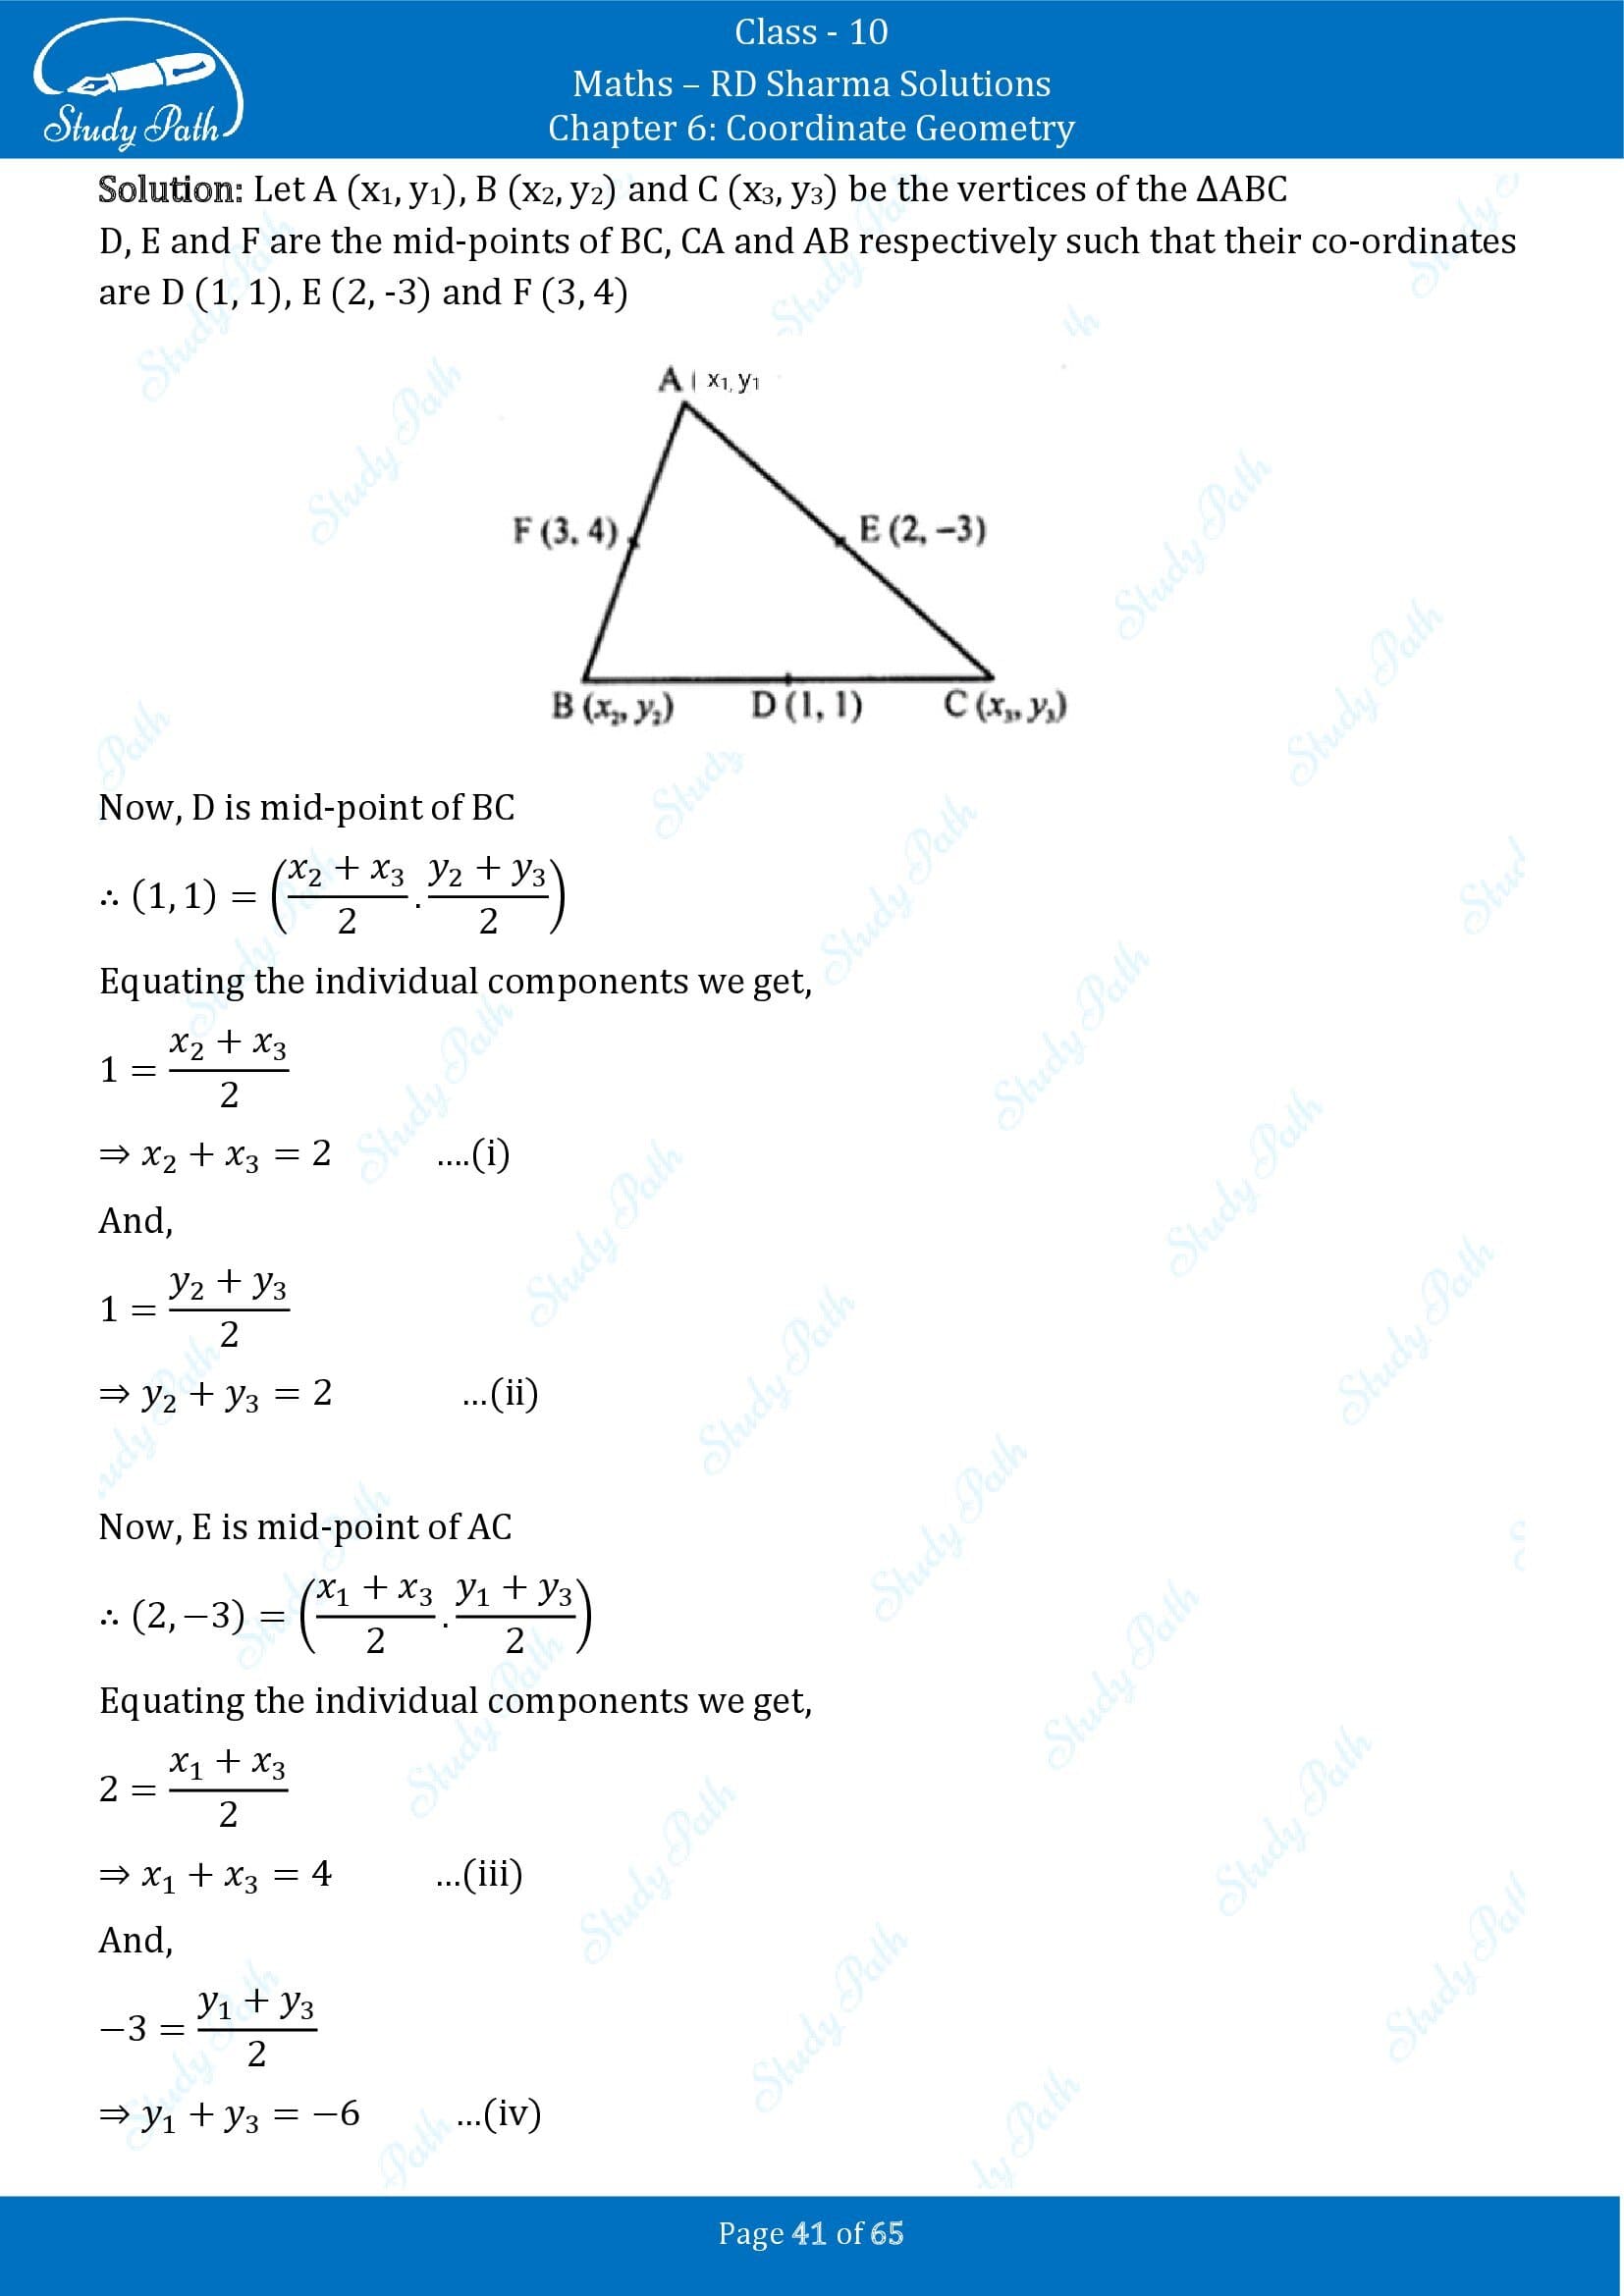 RD Sharma Solutions Class 10 Chapter 6 Coordinate Geometry Exercise 6.3 00041